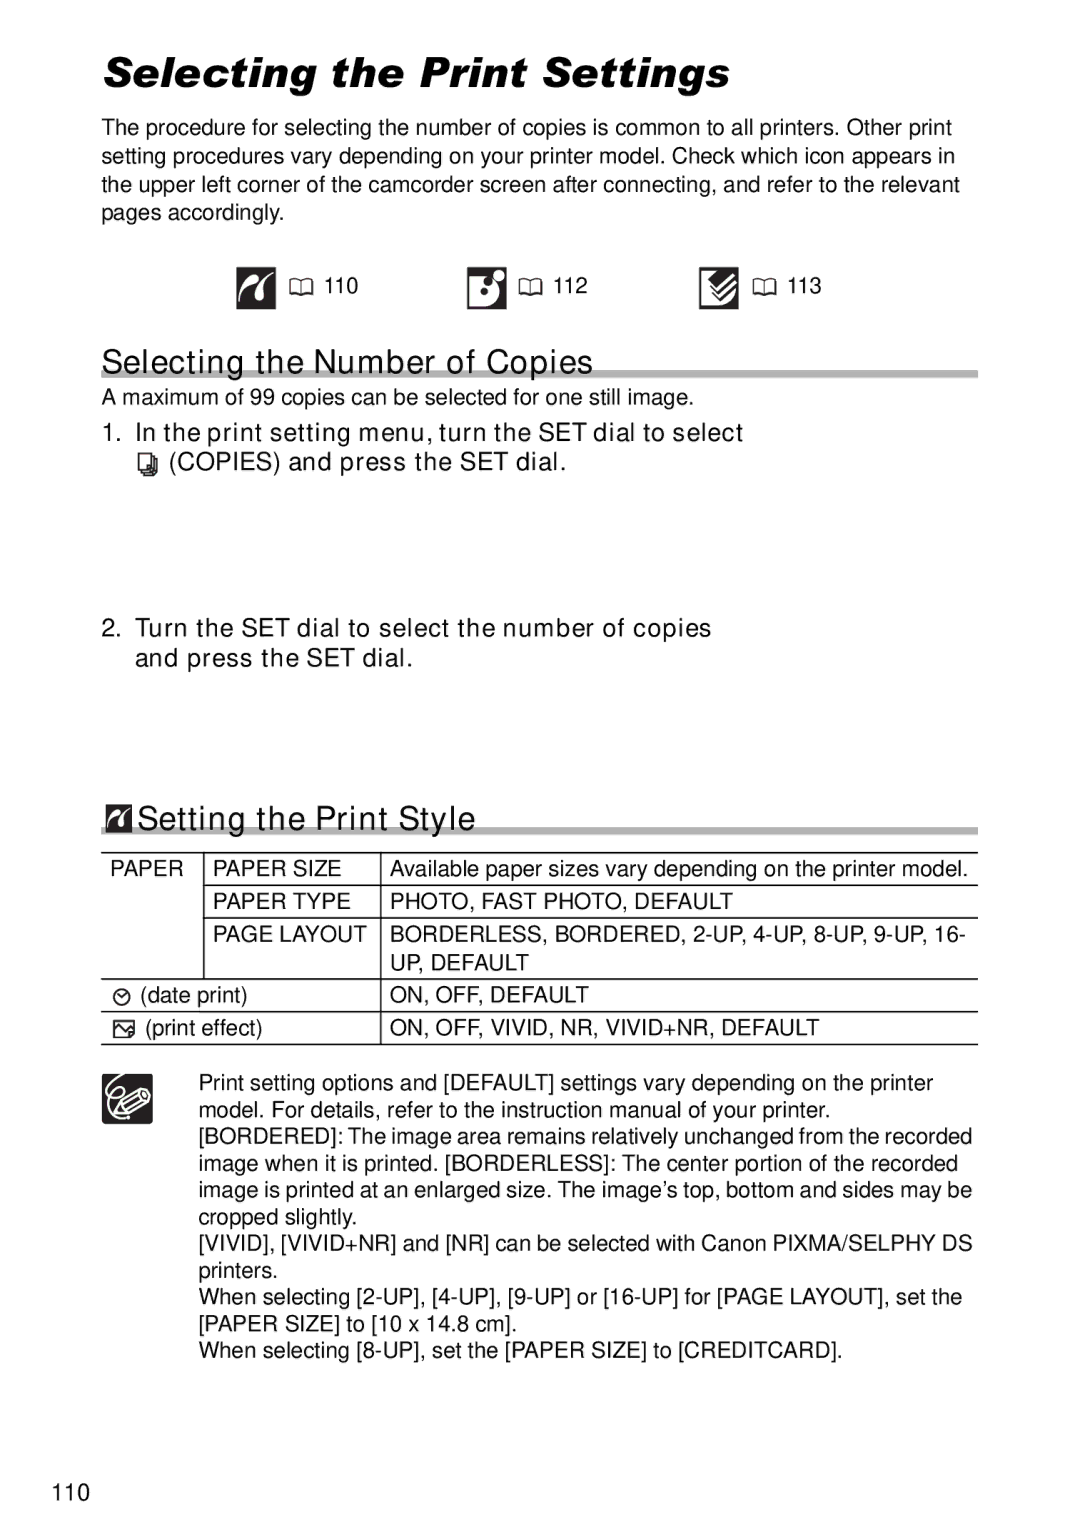 Canon S1 instruction manual Selecting the Print Settings, Selecting the Number of Copies, Setting the Print Style 